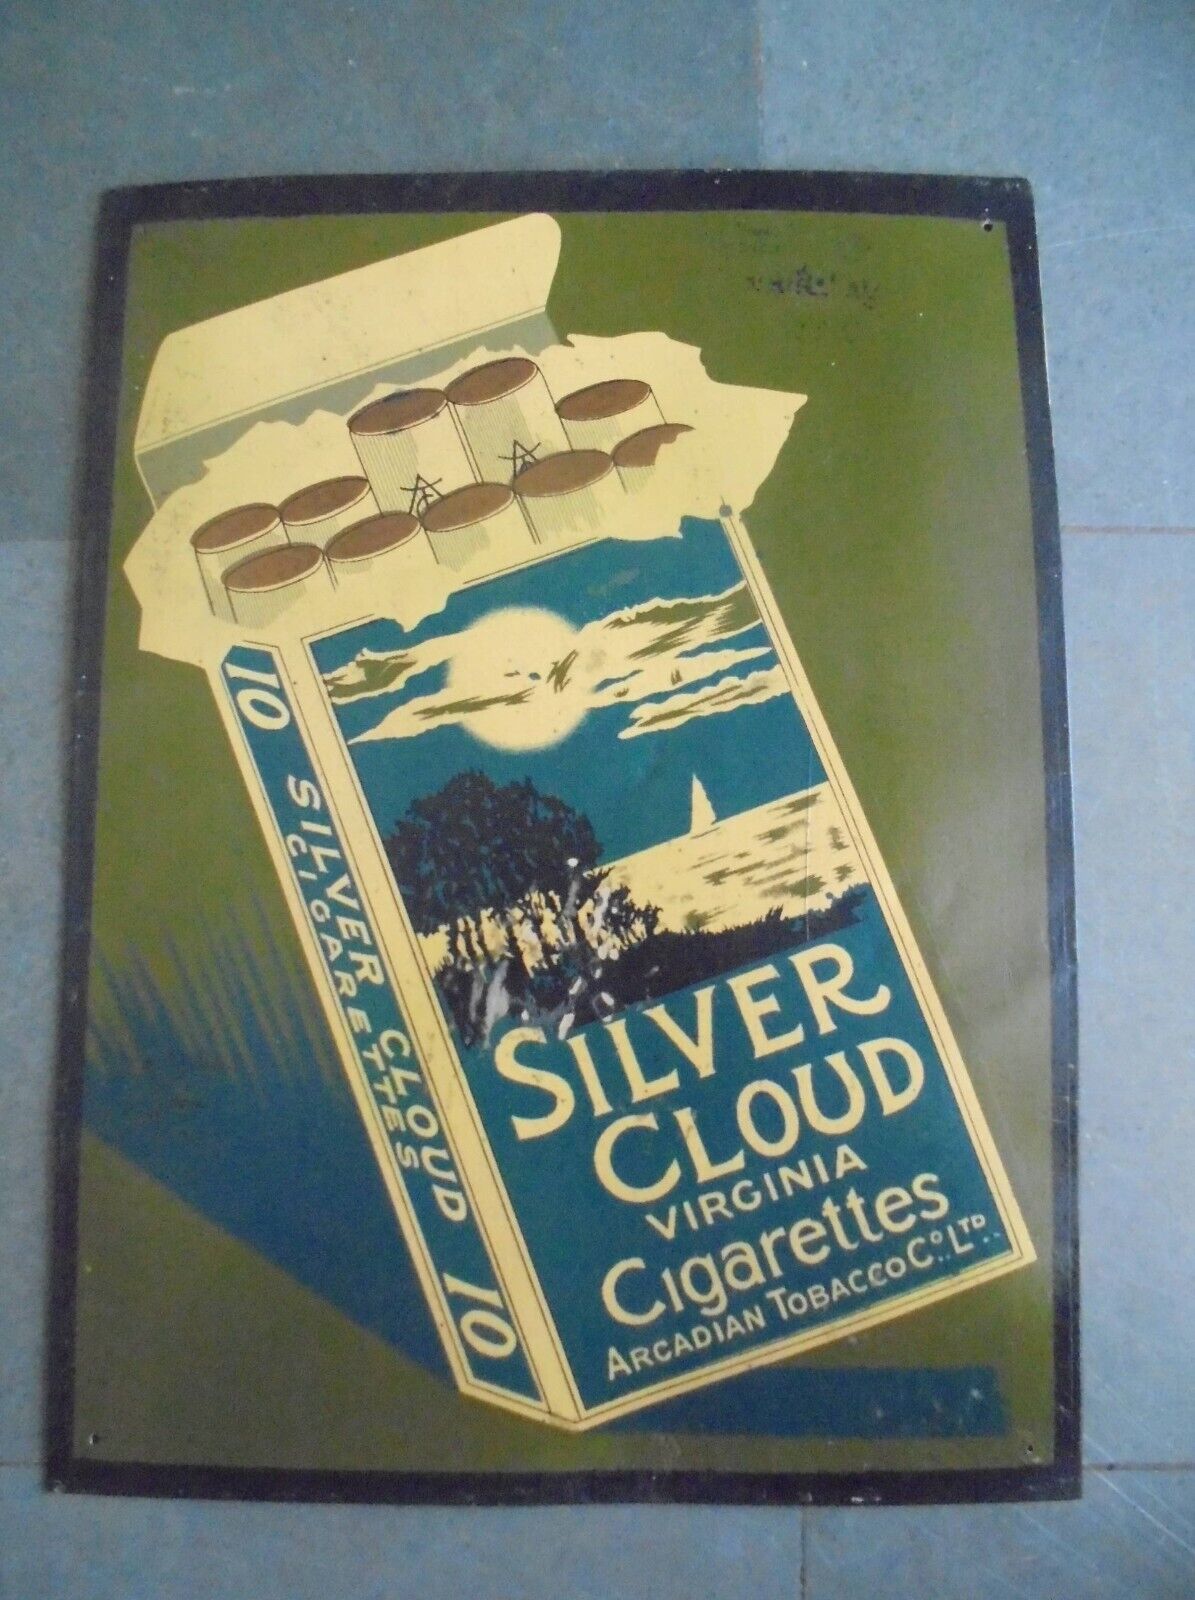 Vintage Silver Cloud Cigarettes Ad Litho Tin Signboard,Collectible